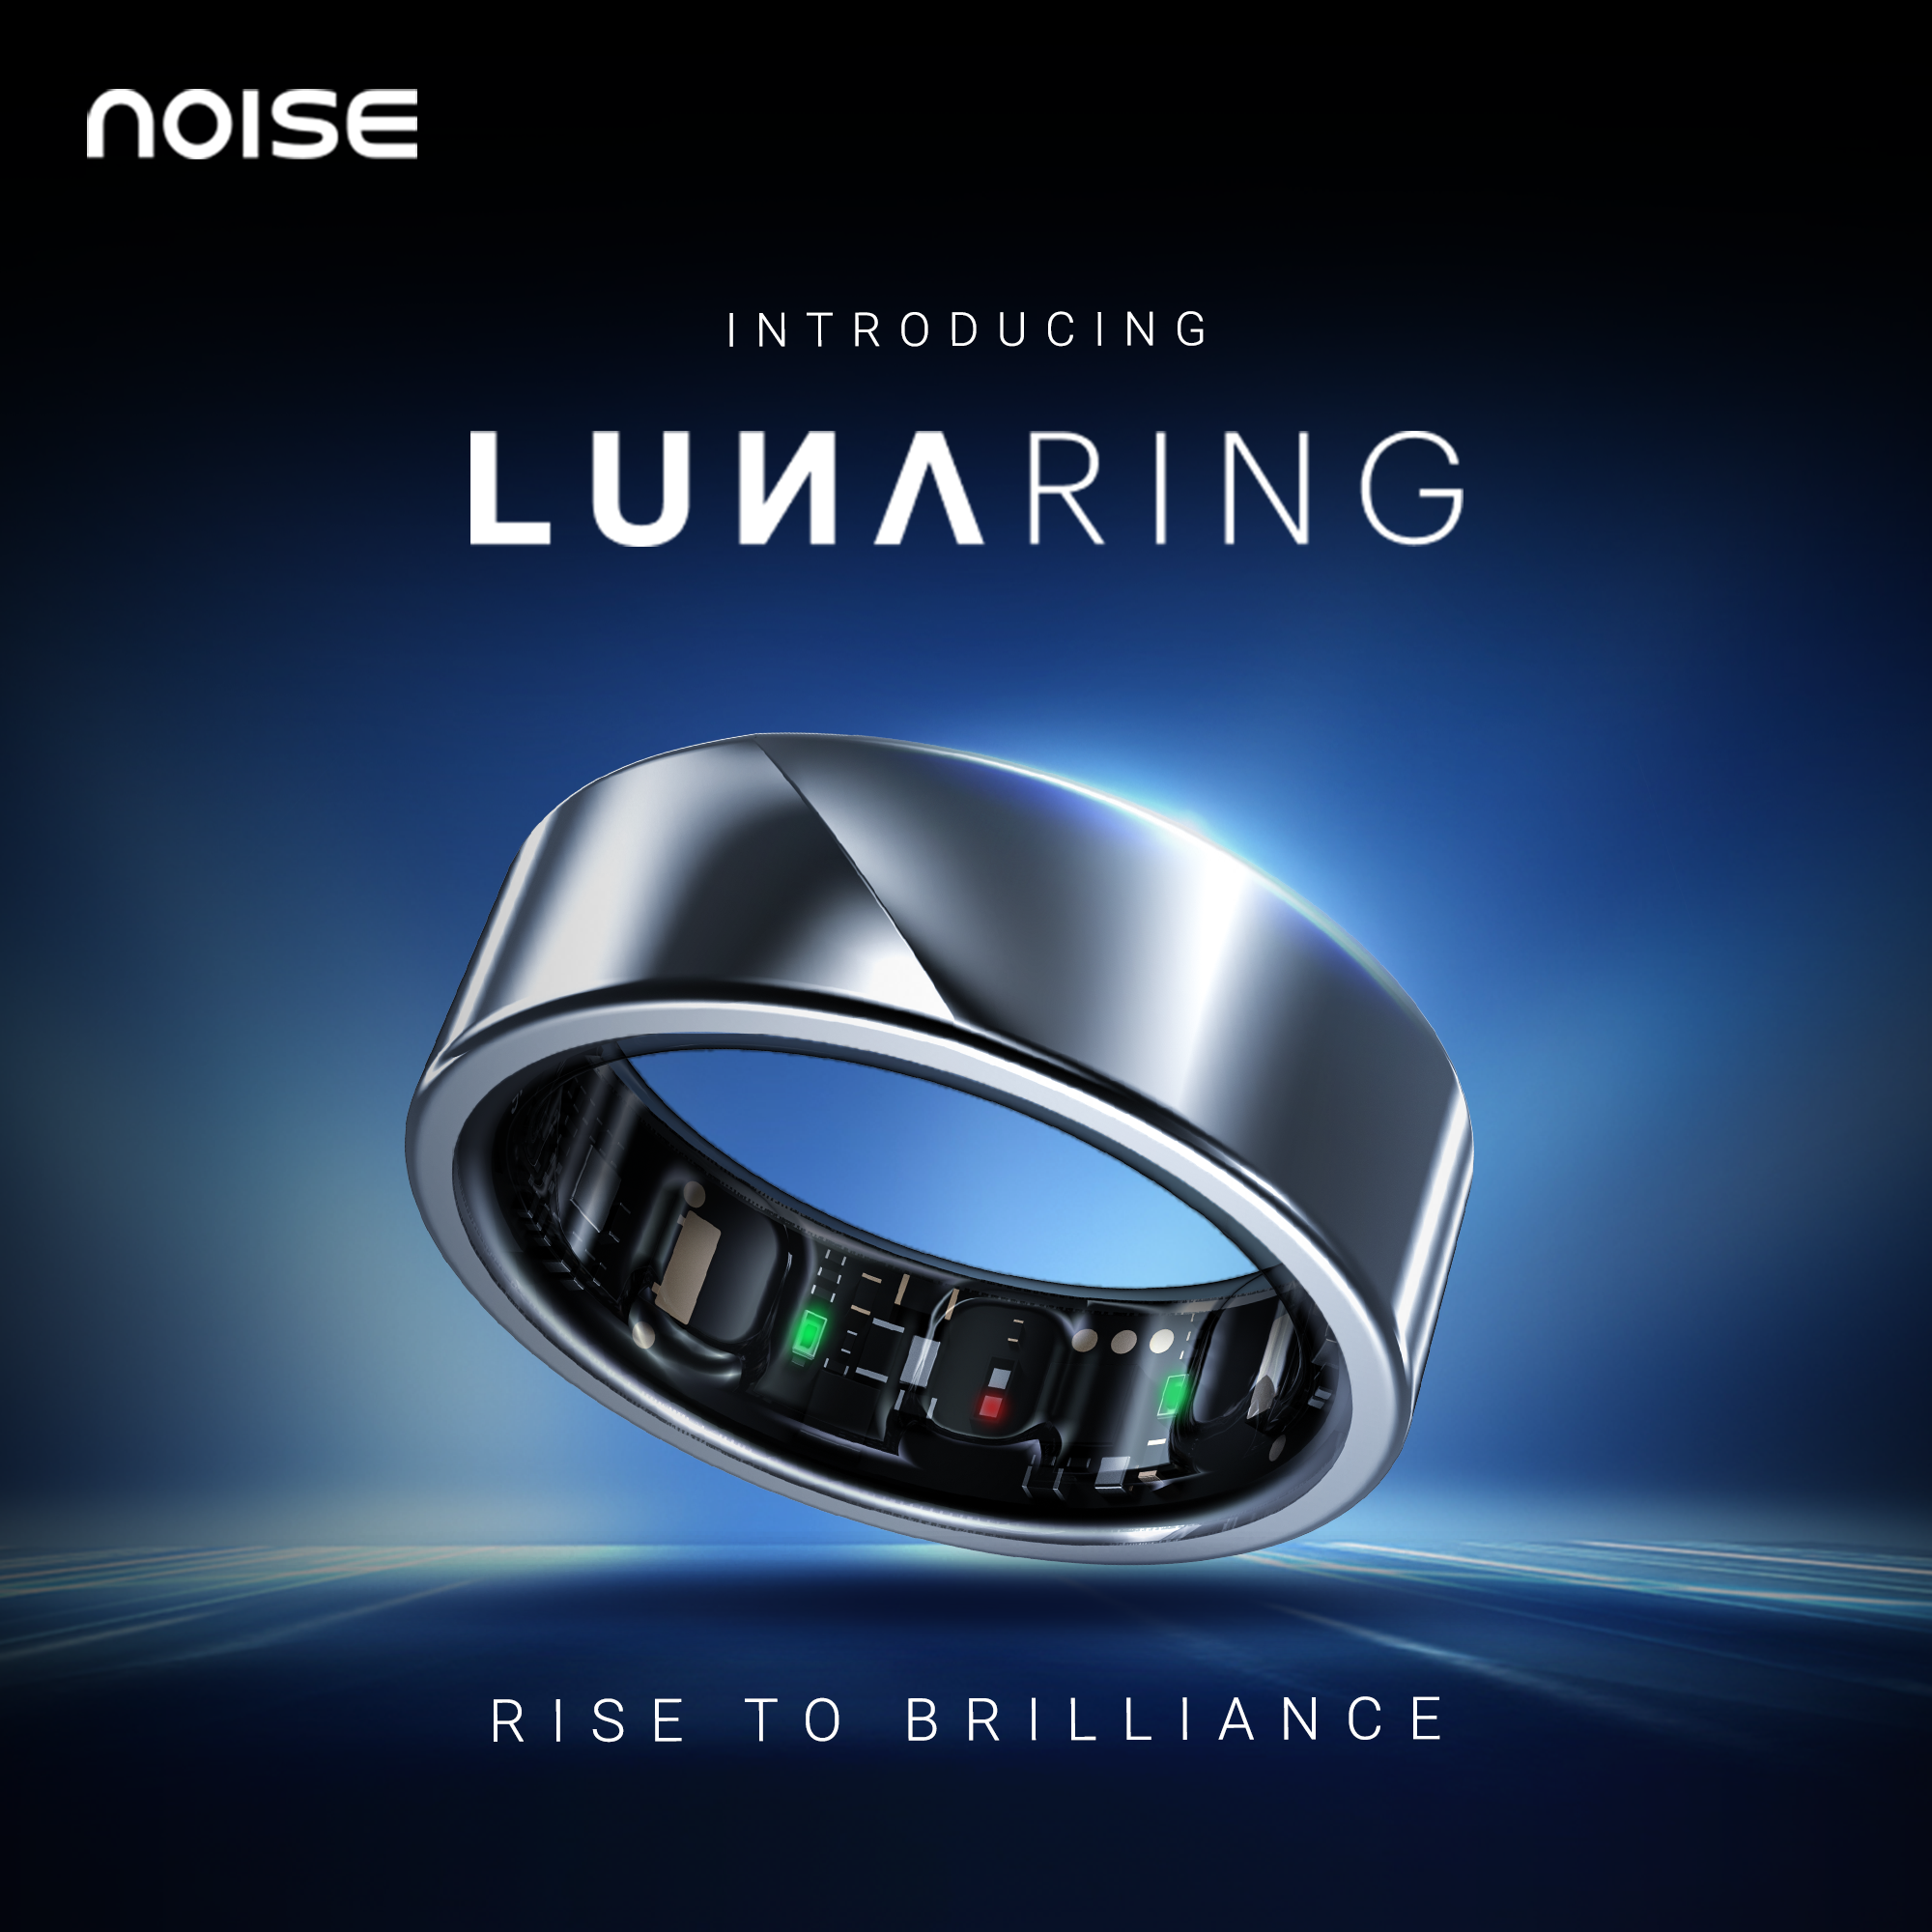 Noise launches its First Smart Ring, Luna Ring; consolidates its leadership in smart wearables with New Form Factor 